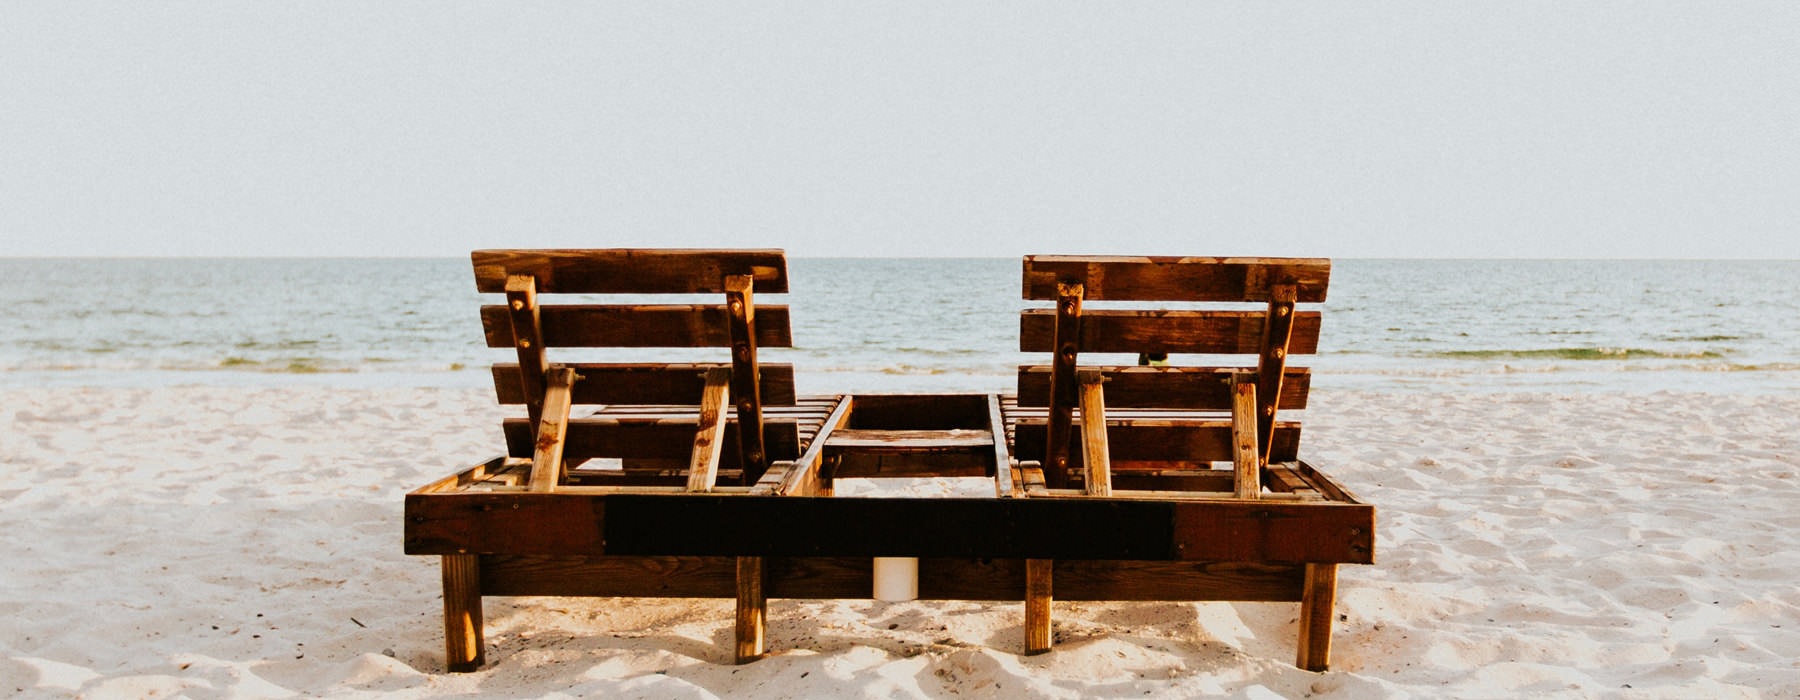 wood framed beach chairs on the shore looking toward the ocean